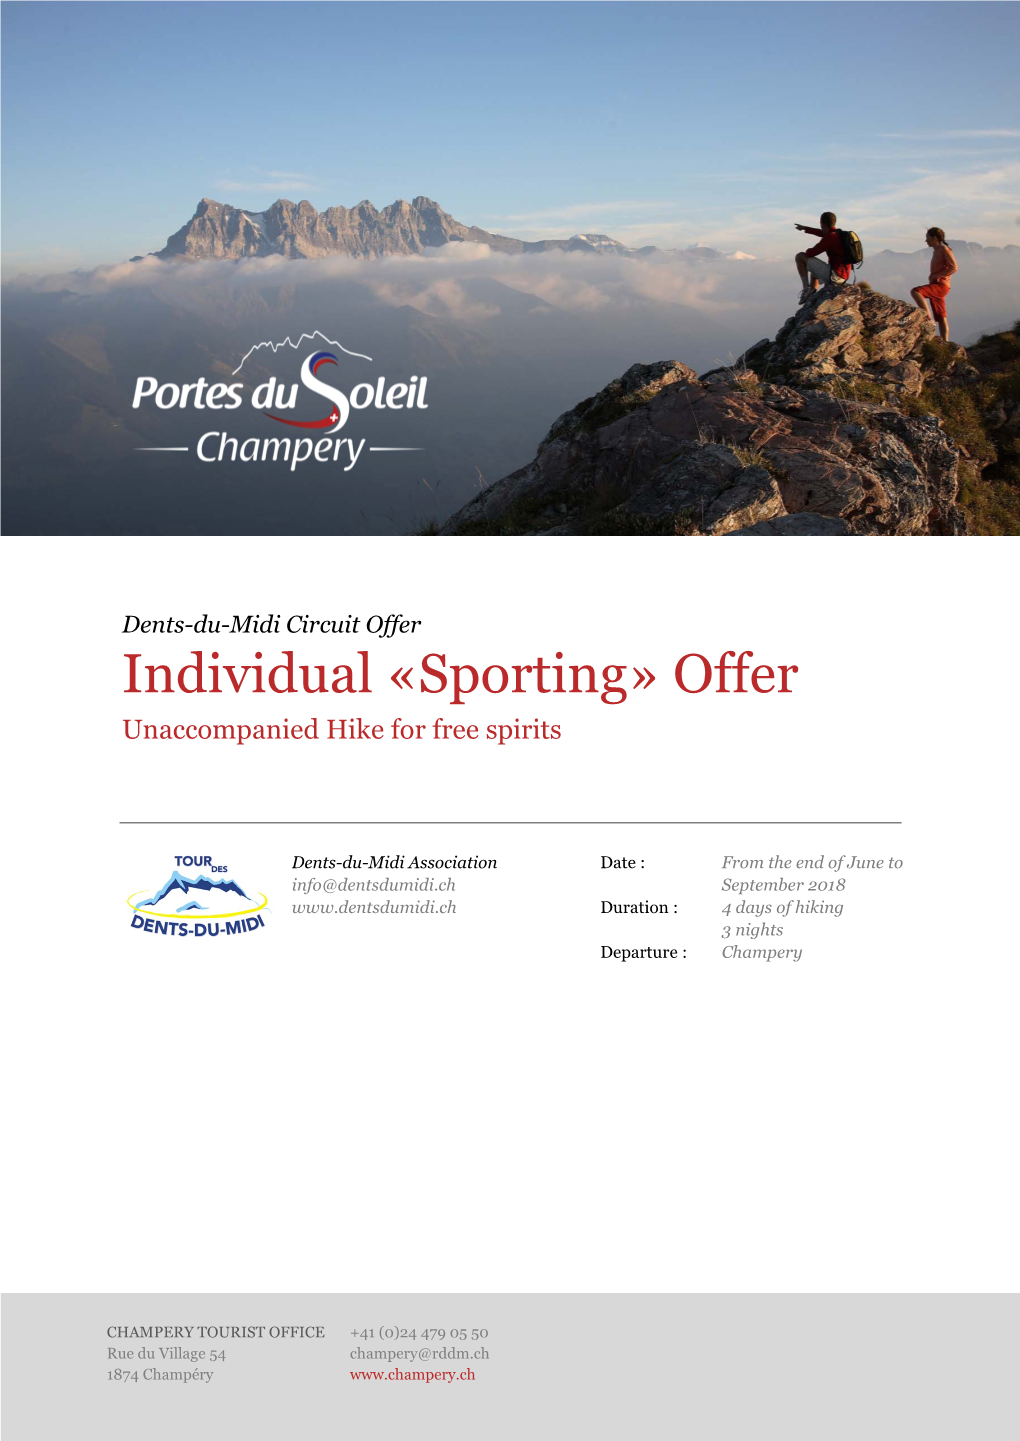 Sportif Des Jeurs Or Auberge De Chindonne Between 6 and 8 Hours Walking Time